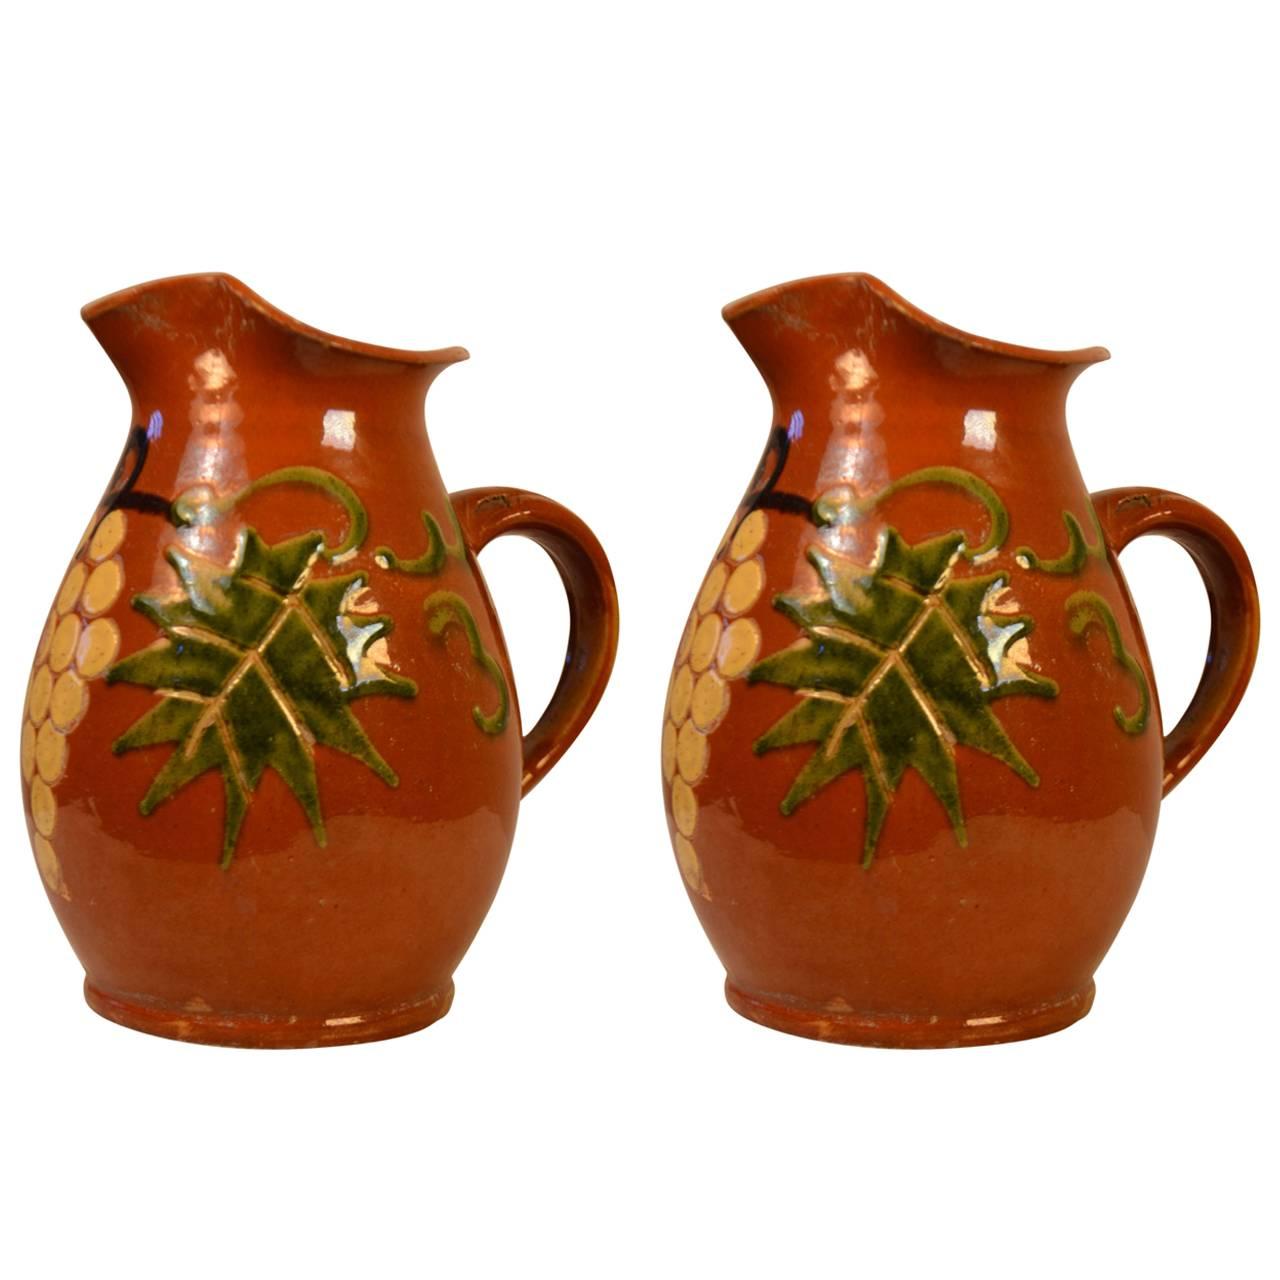 Turn of the Century Pair of Earthenware Pitchers 'Grapes'